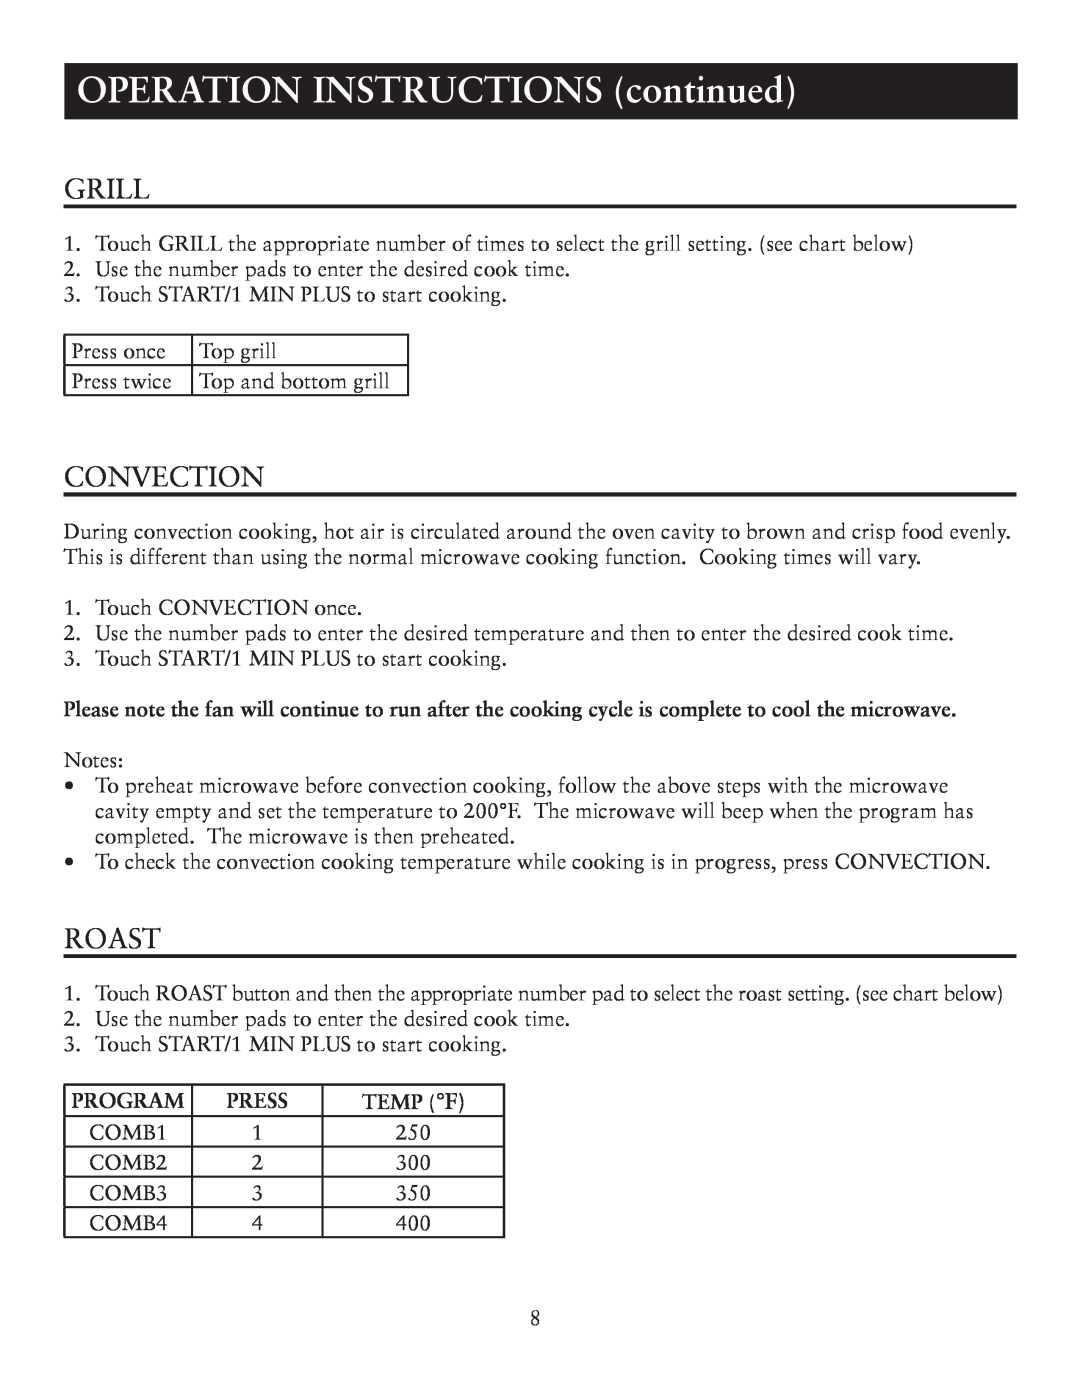 Oster OTM1101VBS user manual OPERATION INSTRUCTIONS continued, Grill, Convection, Roast, Program, Press, Temp F 